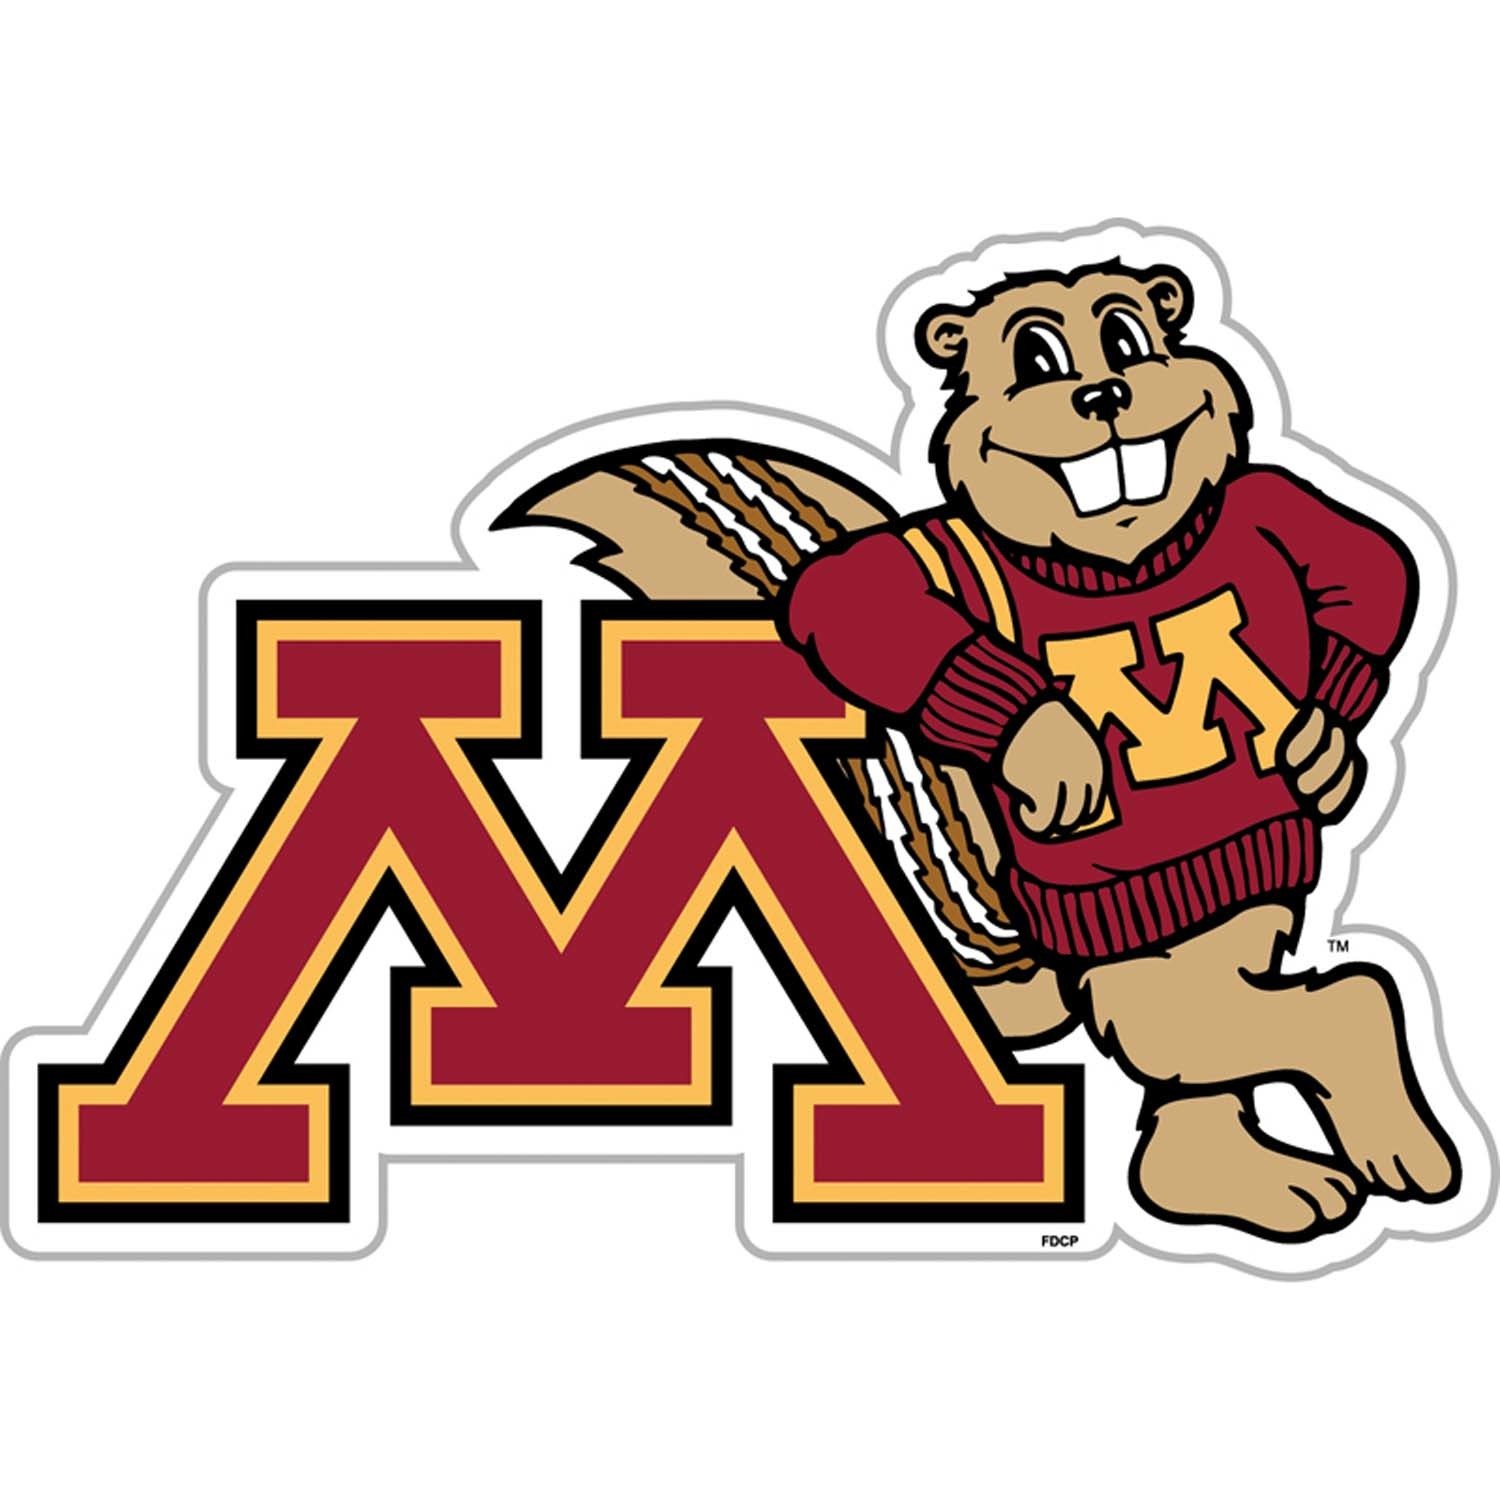 Minnesota Gopher and B1G sports mostly 🏈 ☕️ 🏀